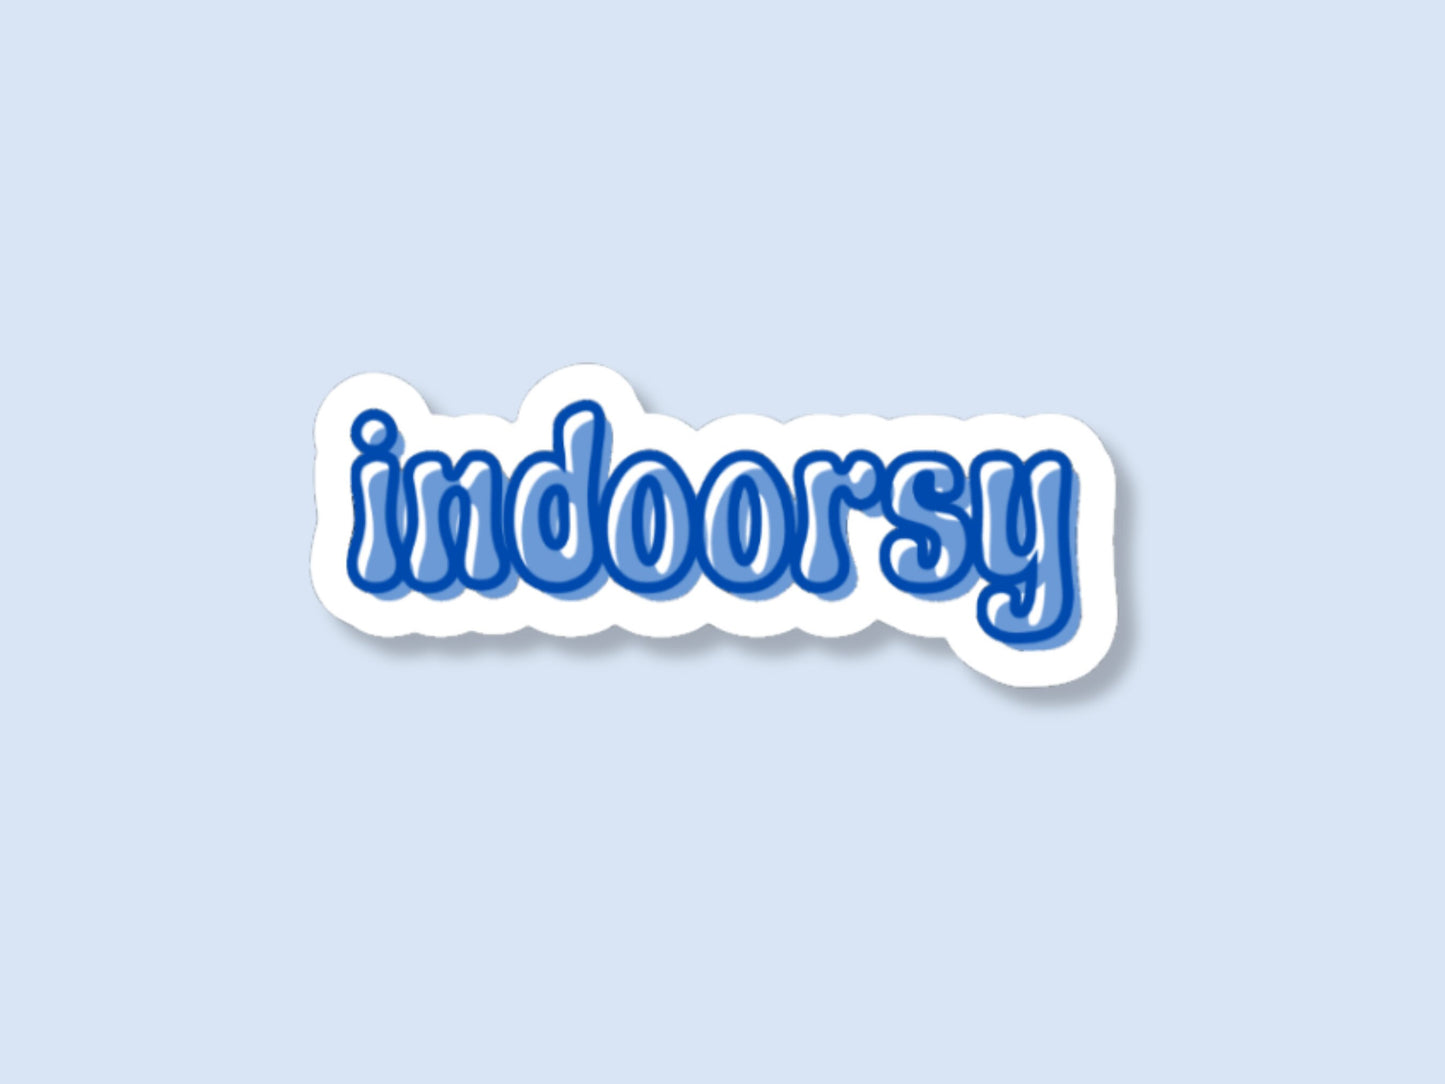 indoorsy sticker, funny stickers, gifts for friends, introvert gifts, introvert sticker, sarcastic stickers, stickers for laptop